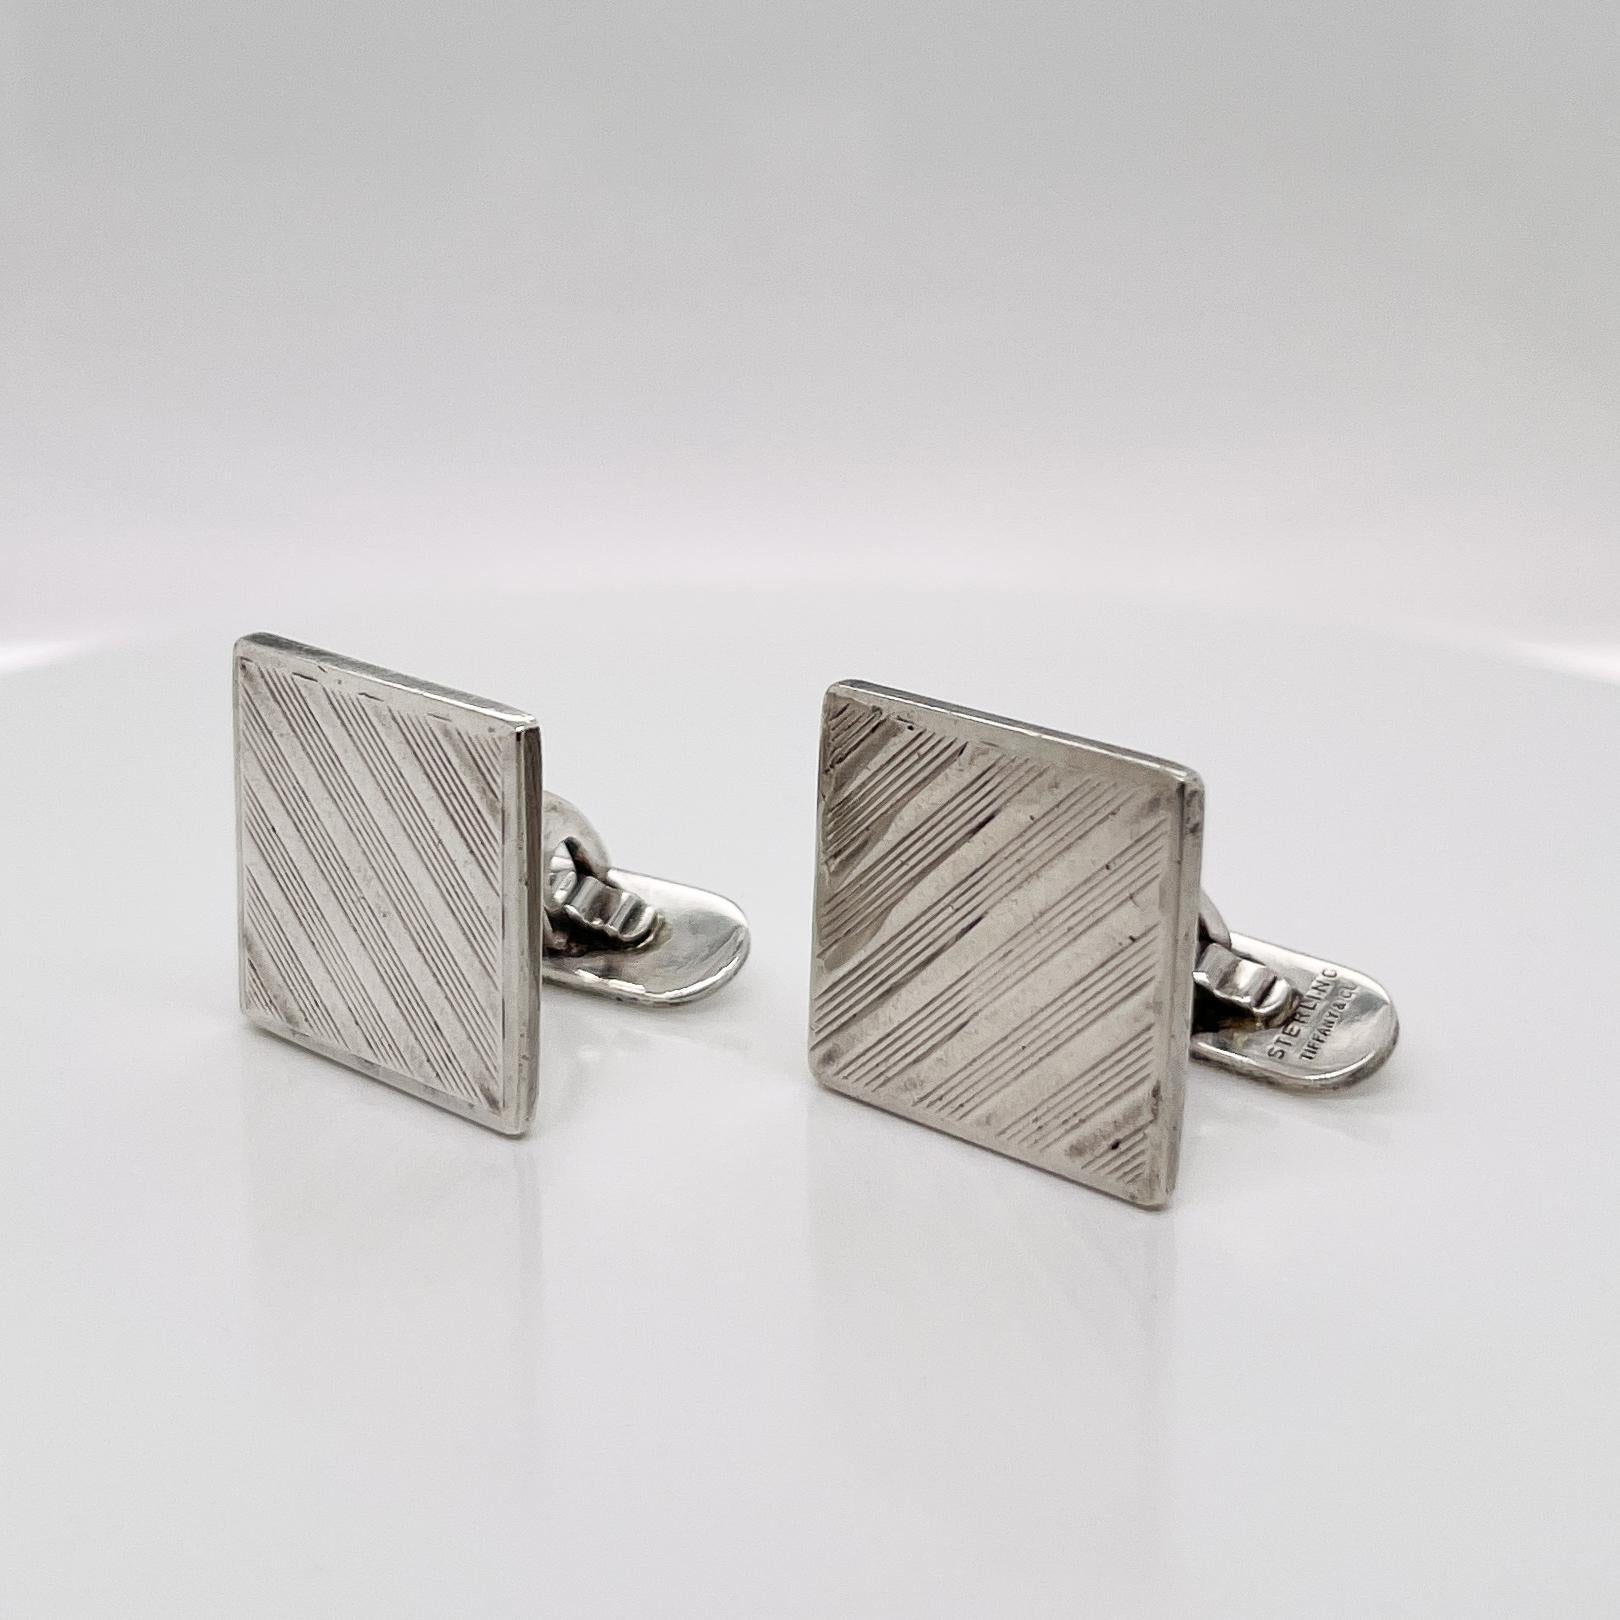 A very fine pair of Tiffany & Co. sterling silver cufflinks.

Having sterling silver square heads engraved with alternating thick and thin diagonal stripes.

Simply a smart pair of Tiffany links!

Date:
20th Century

Overall Condition:
It is in